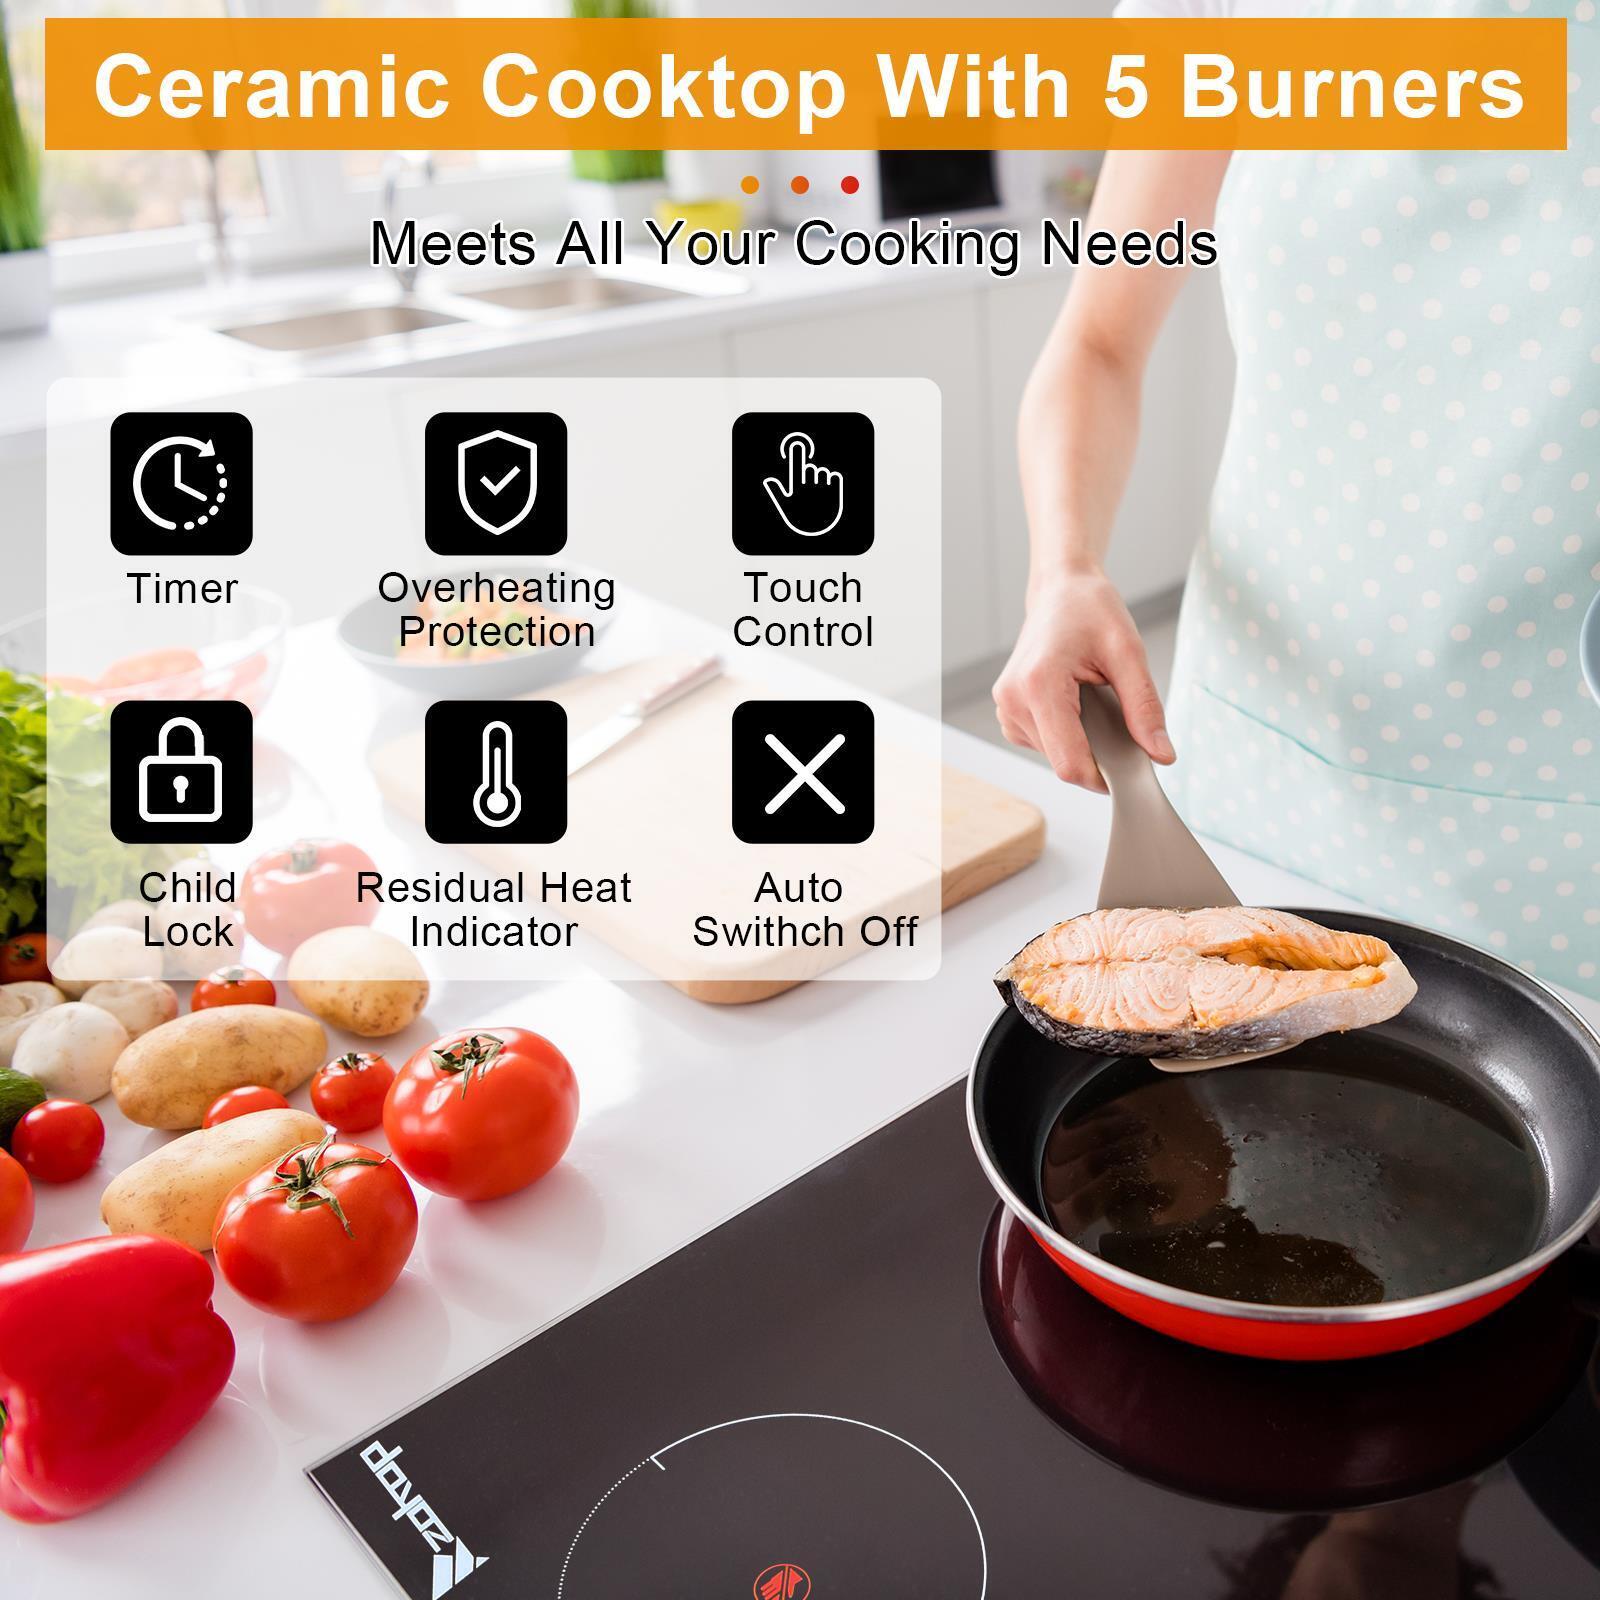 Great Choice Products Built-In Electric Stove Top Sensor Touch 30'' 7600W Cooktop 5 Burner Timer